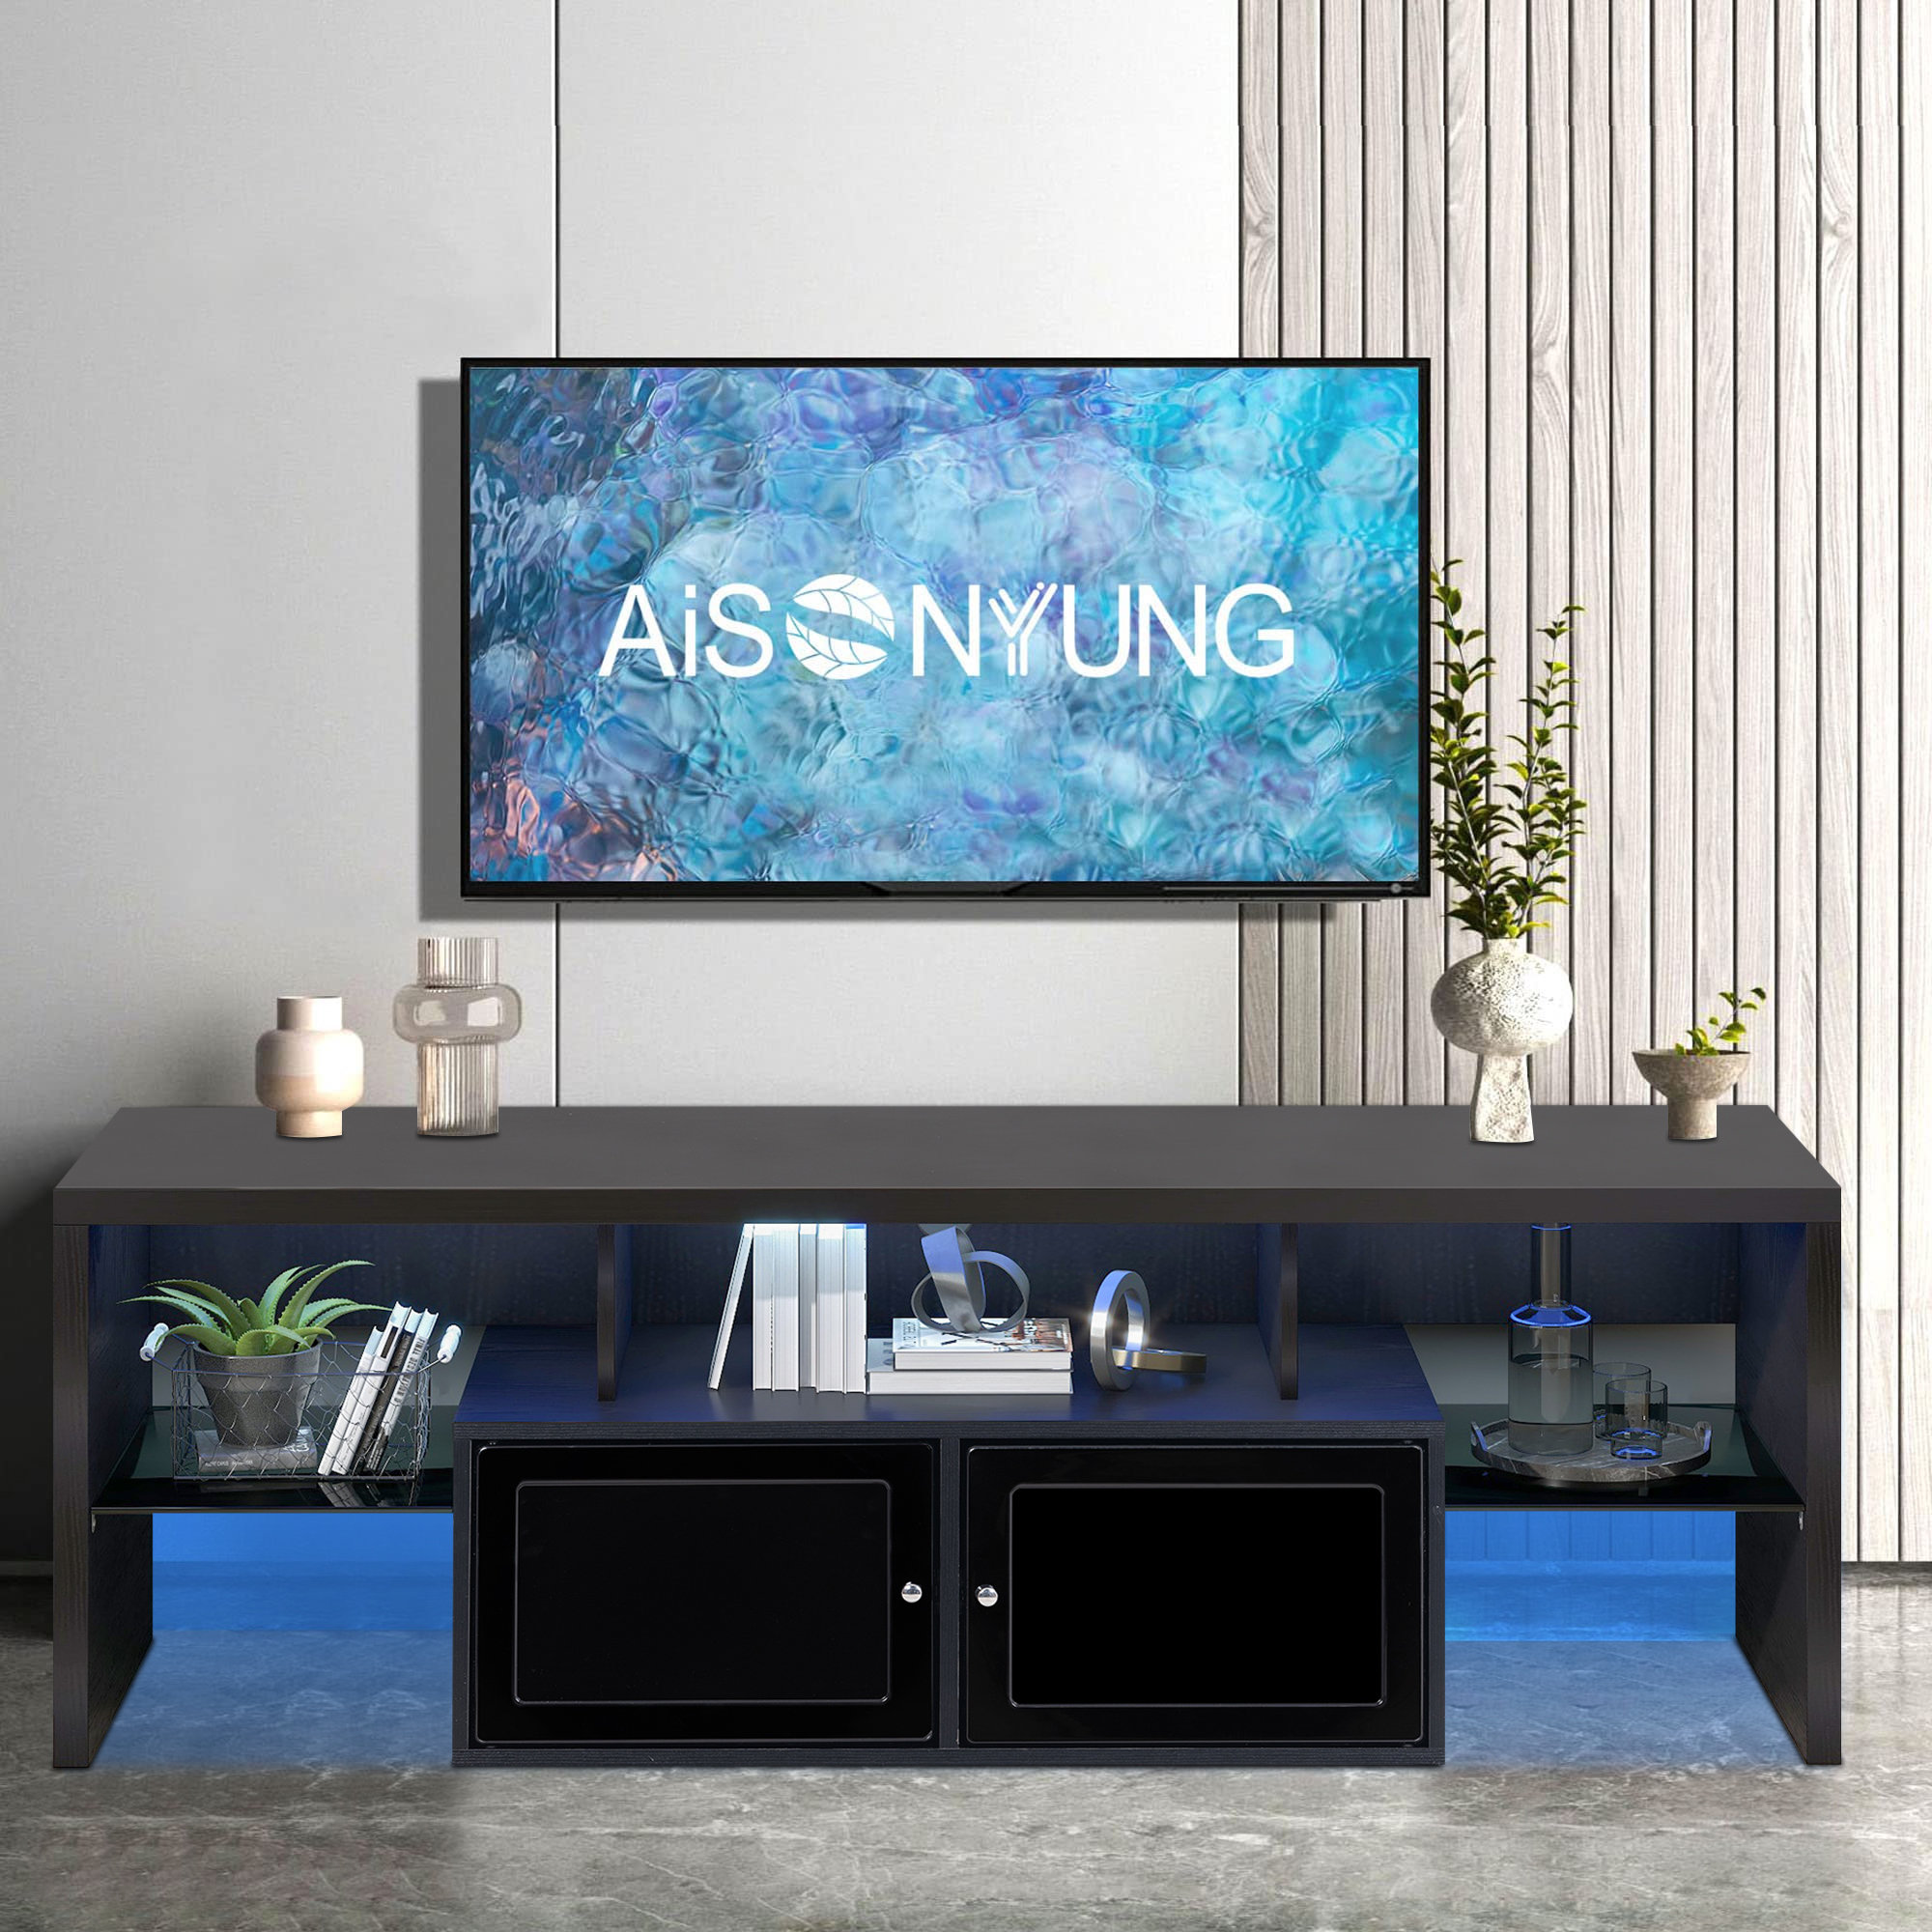 62.9 in. Wood Black TV Stand Entertainment Center with Storage Cabinet